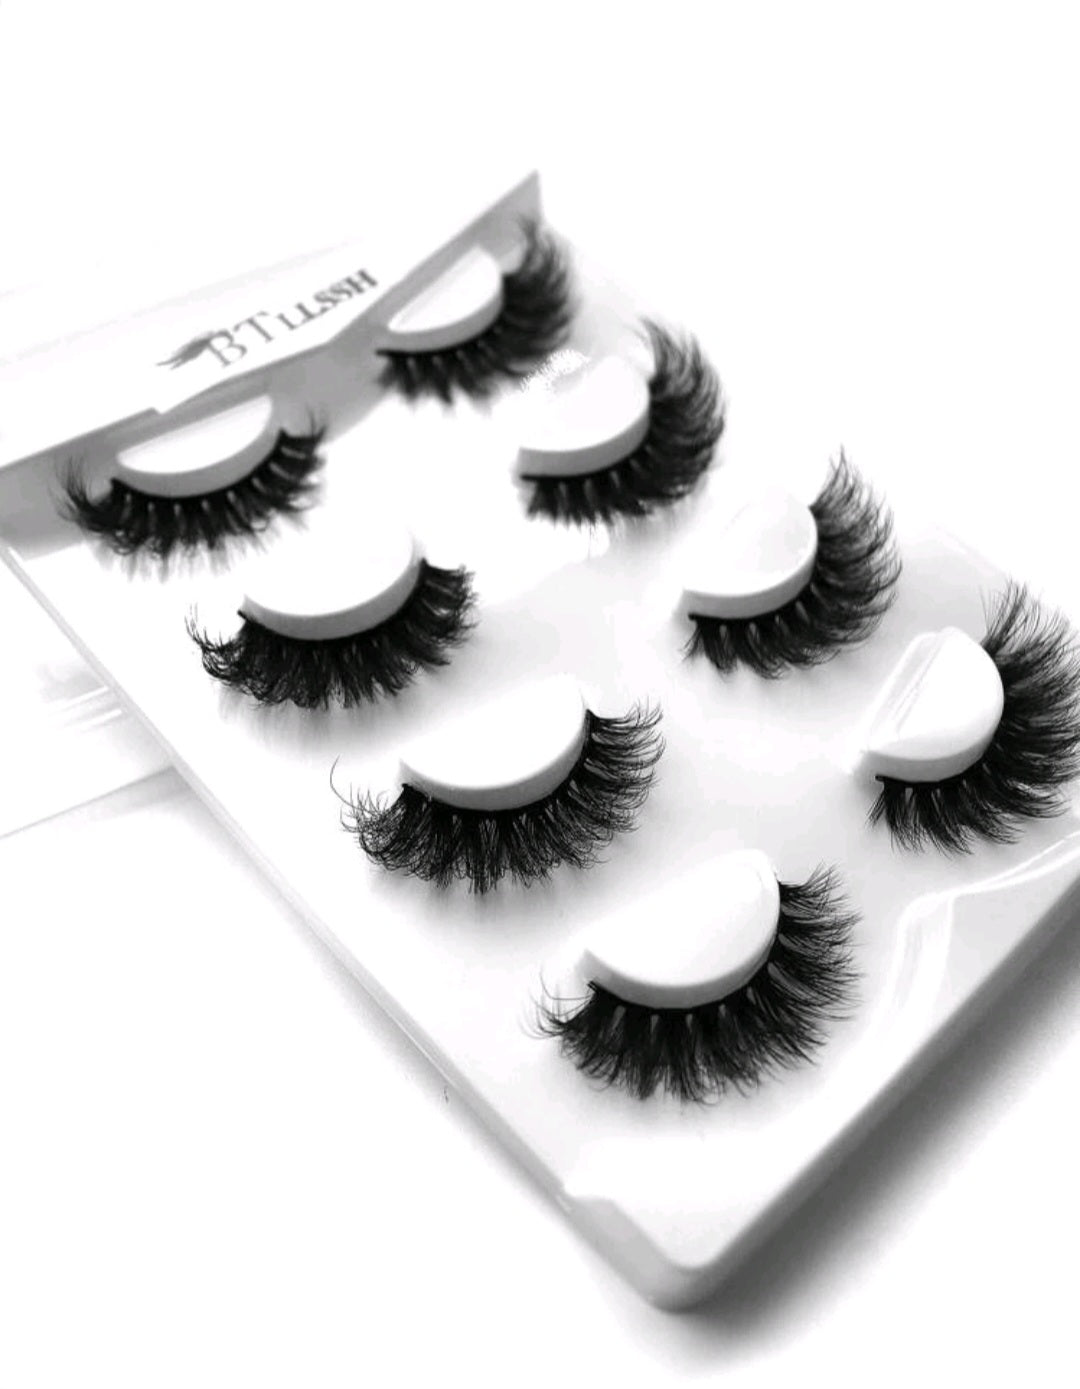 4 pairs Cateye False Eyelashes -4 paia di ciglia finte - SANDY'S MAKEUP AND ARTISTRY 